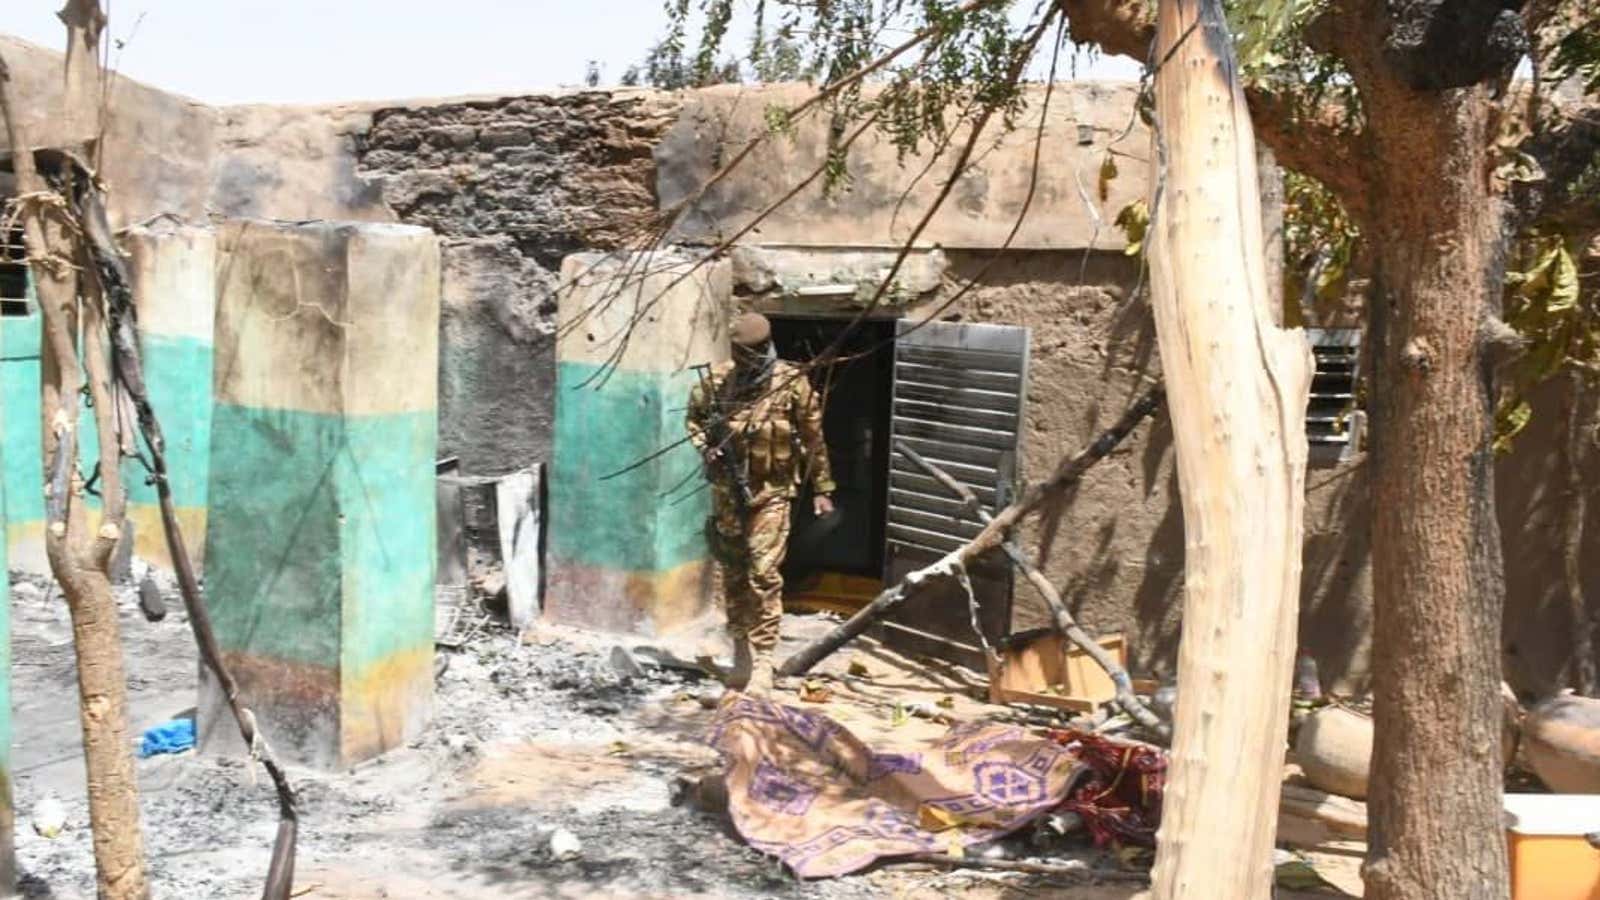 A soldier walks amid the damage after an attack by gunmen on Fulani herders in Ogossagou, Mali March 25, 2019.